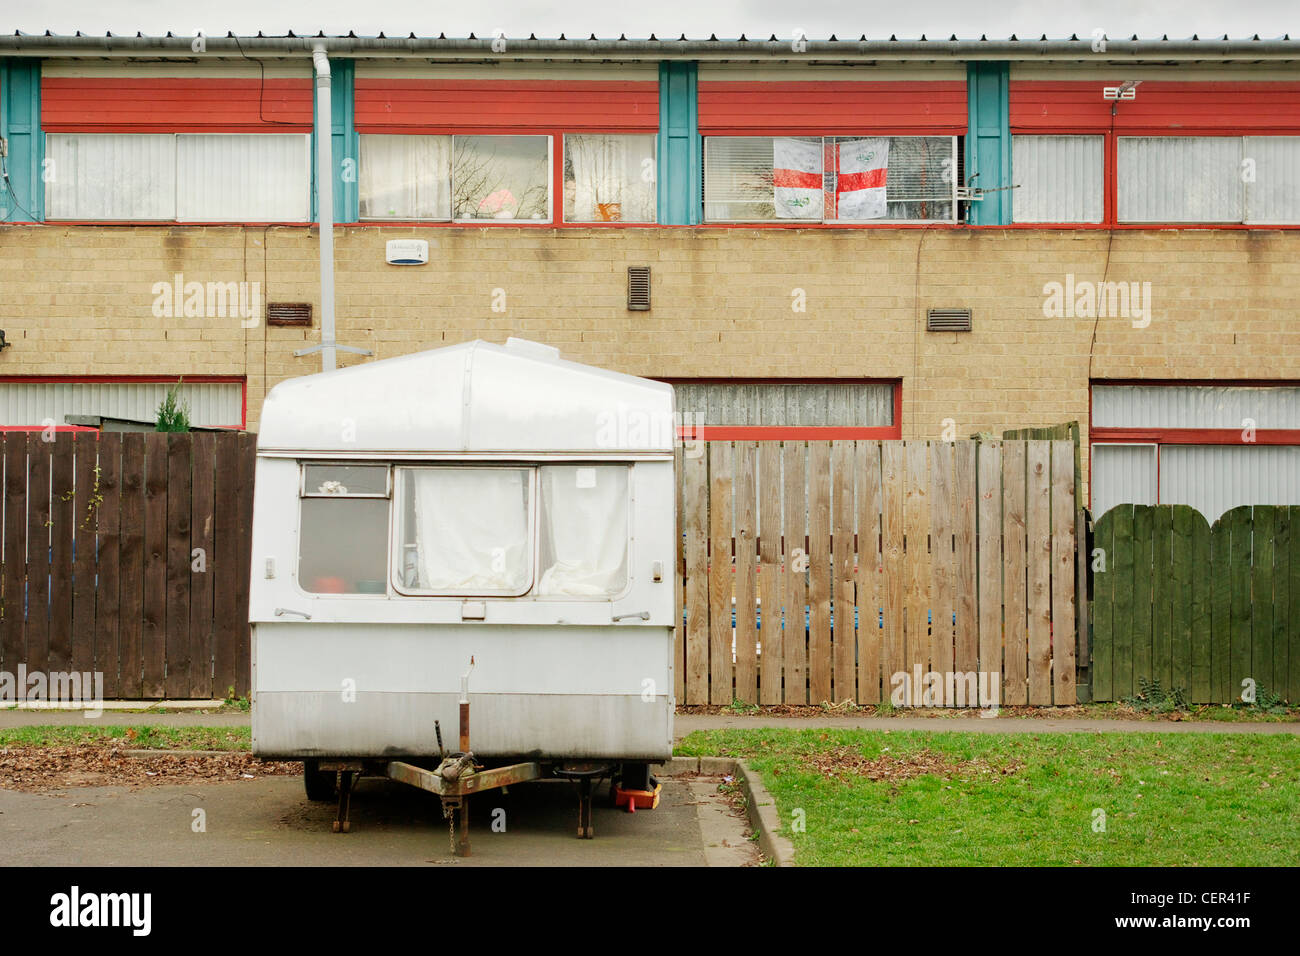 Old caravan outside council house with St. George’s flag in the window. Stock Photo